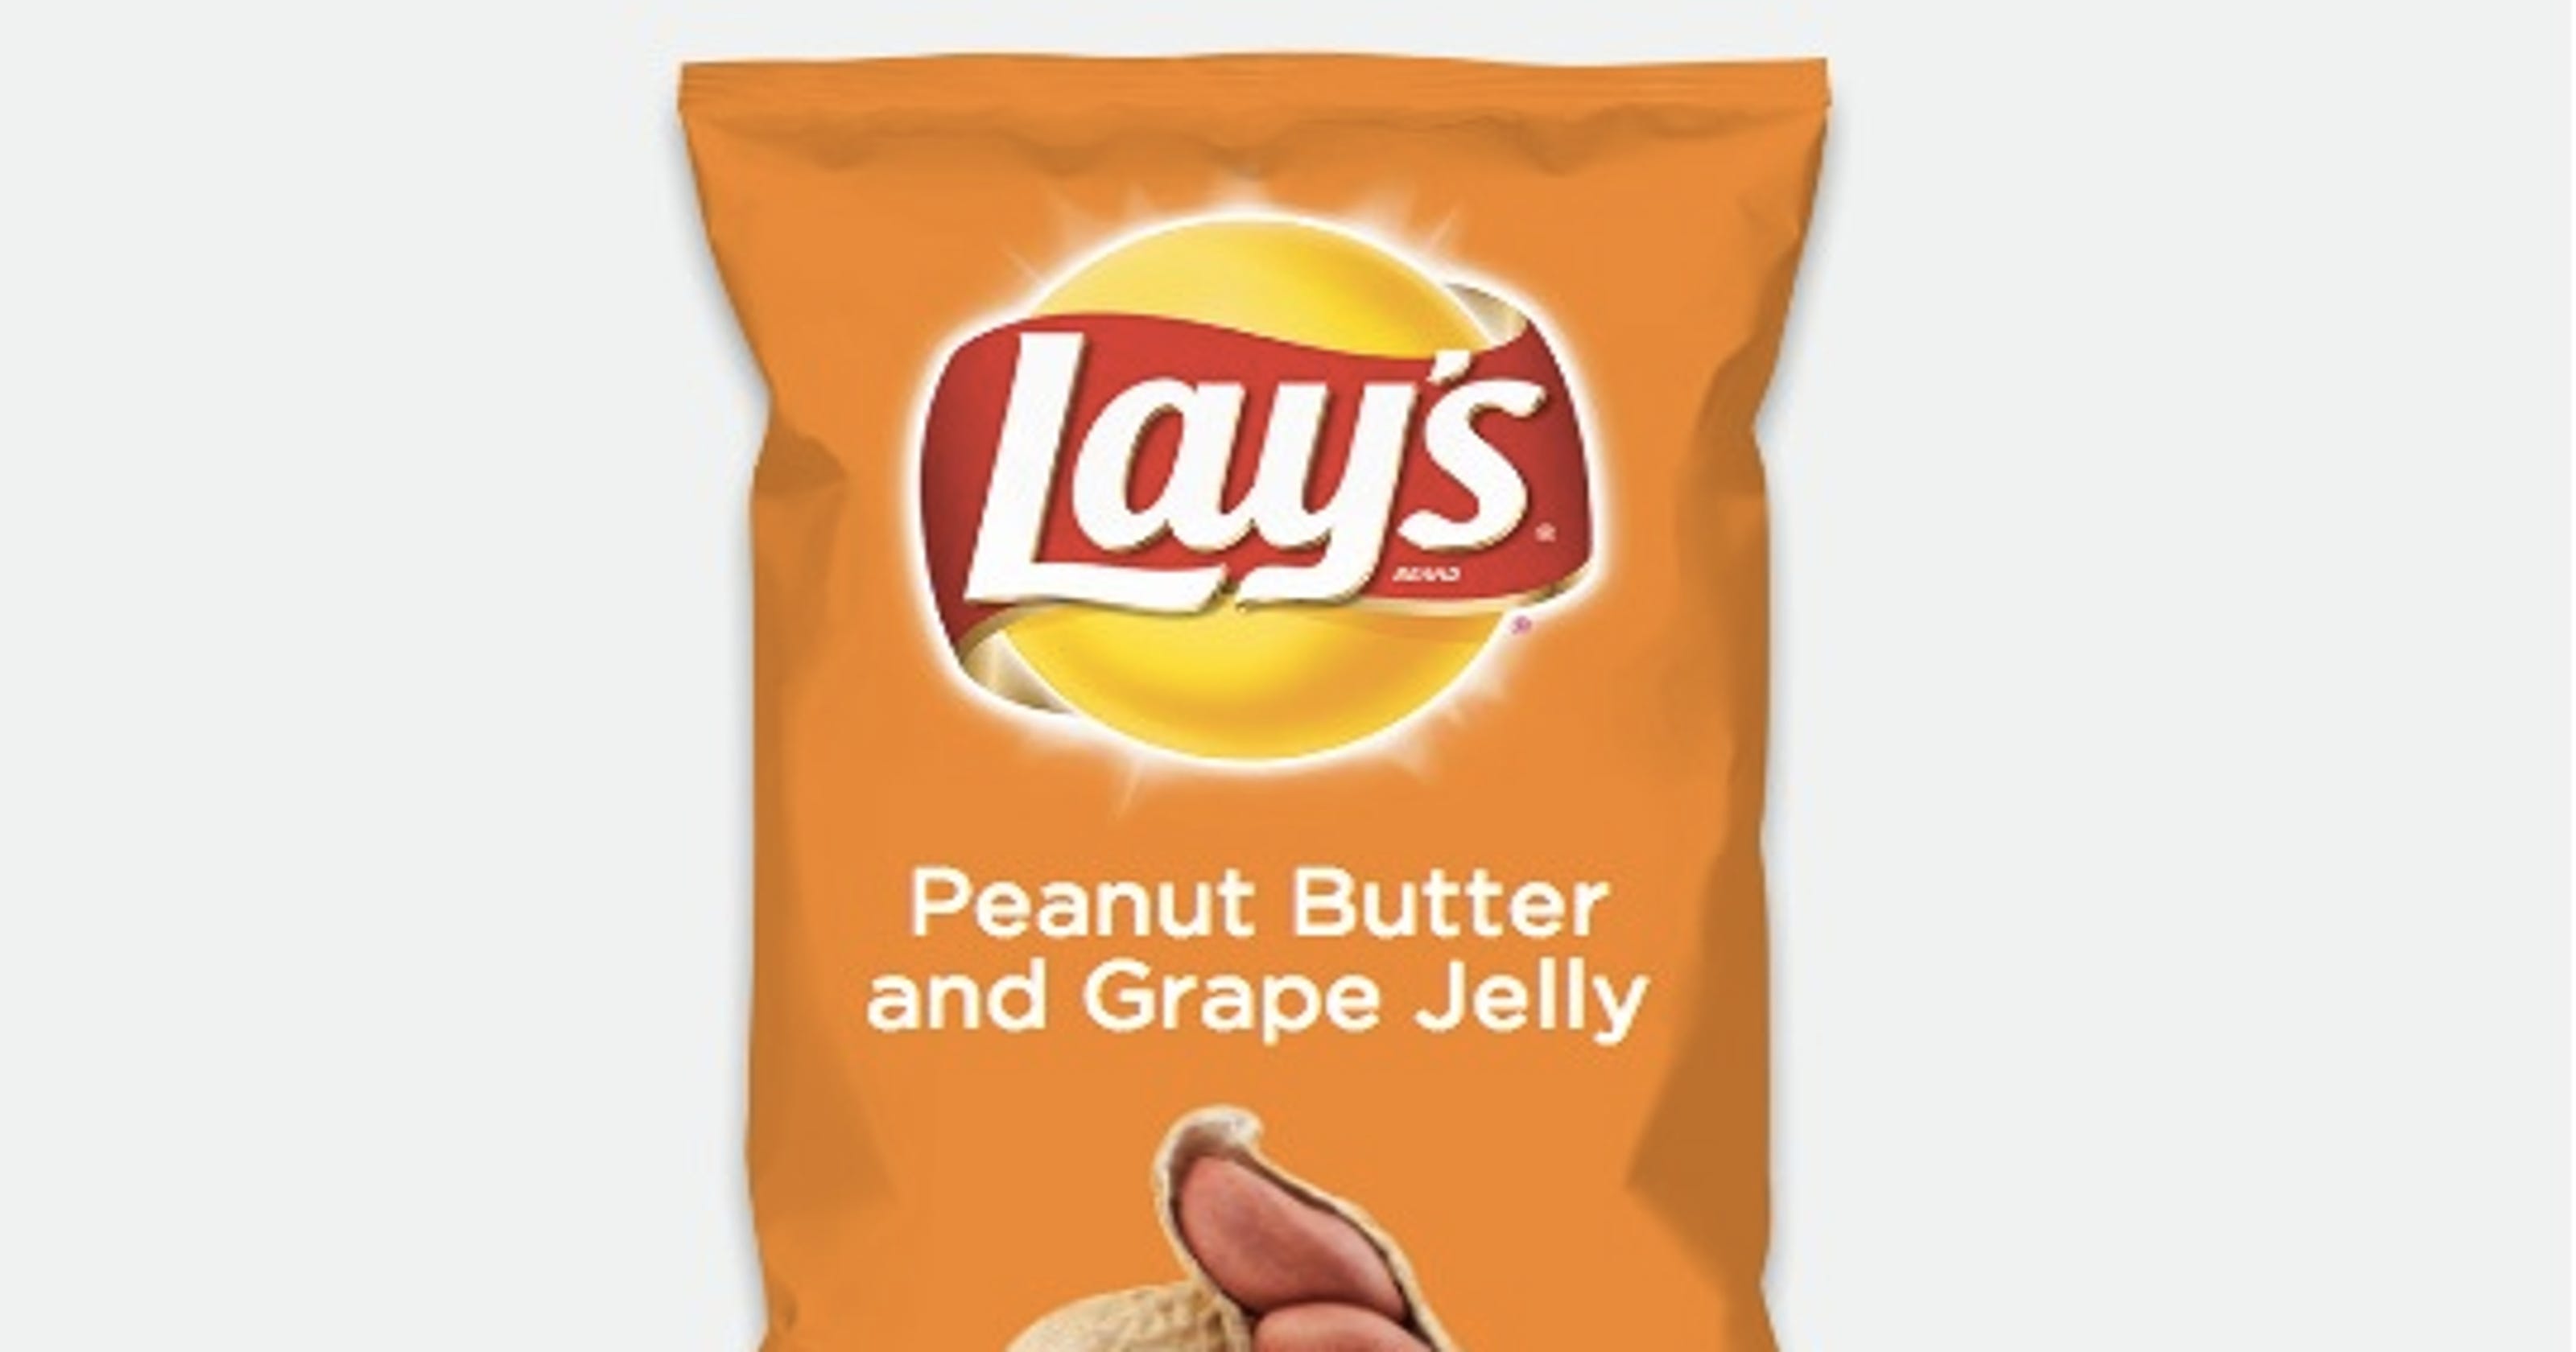 Lay's brings back its create-a-flavor contest